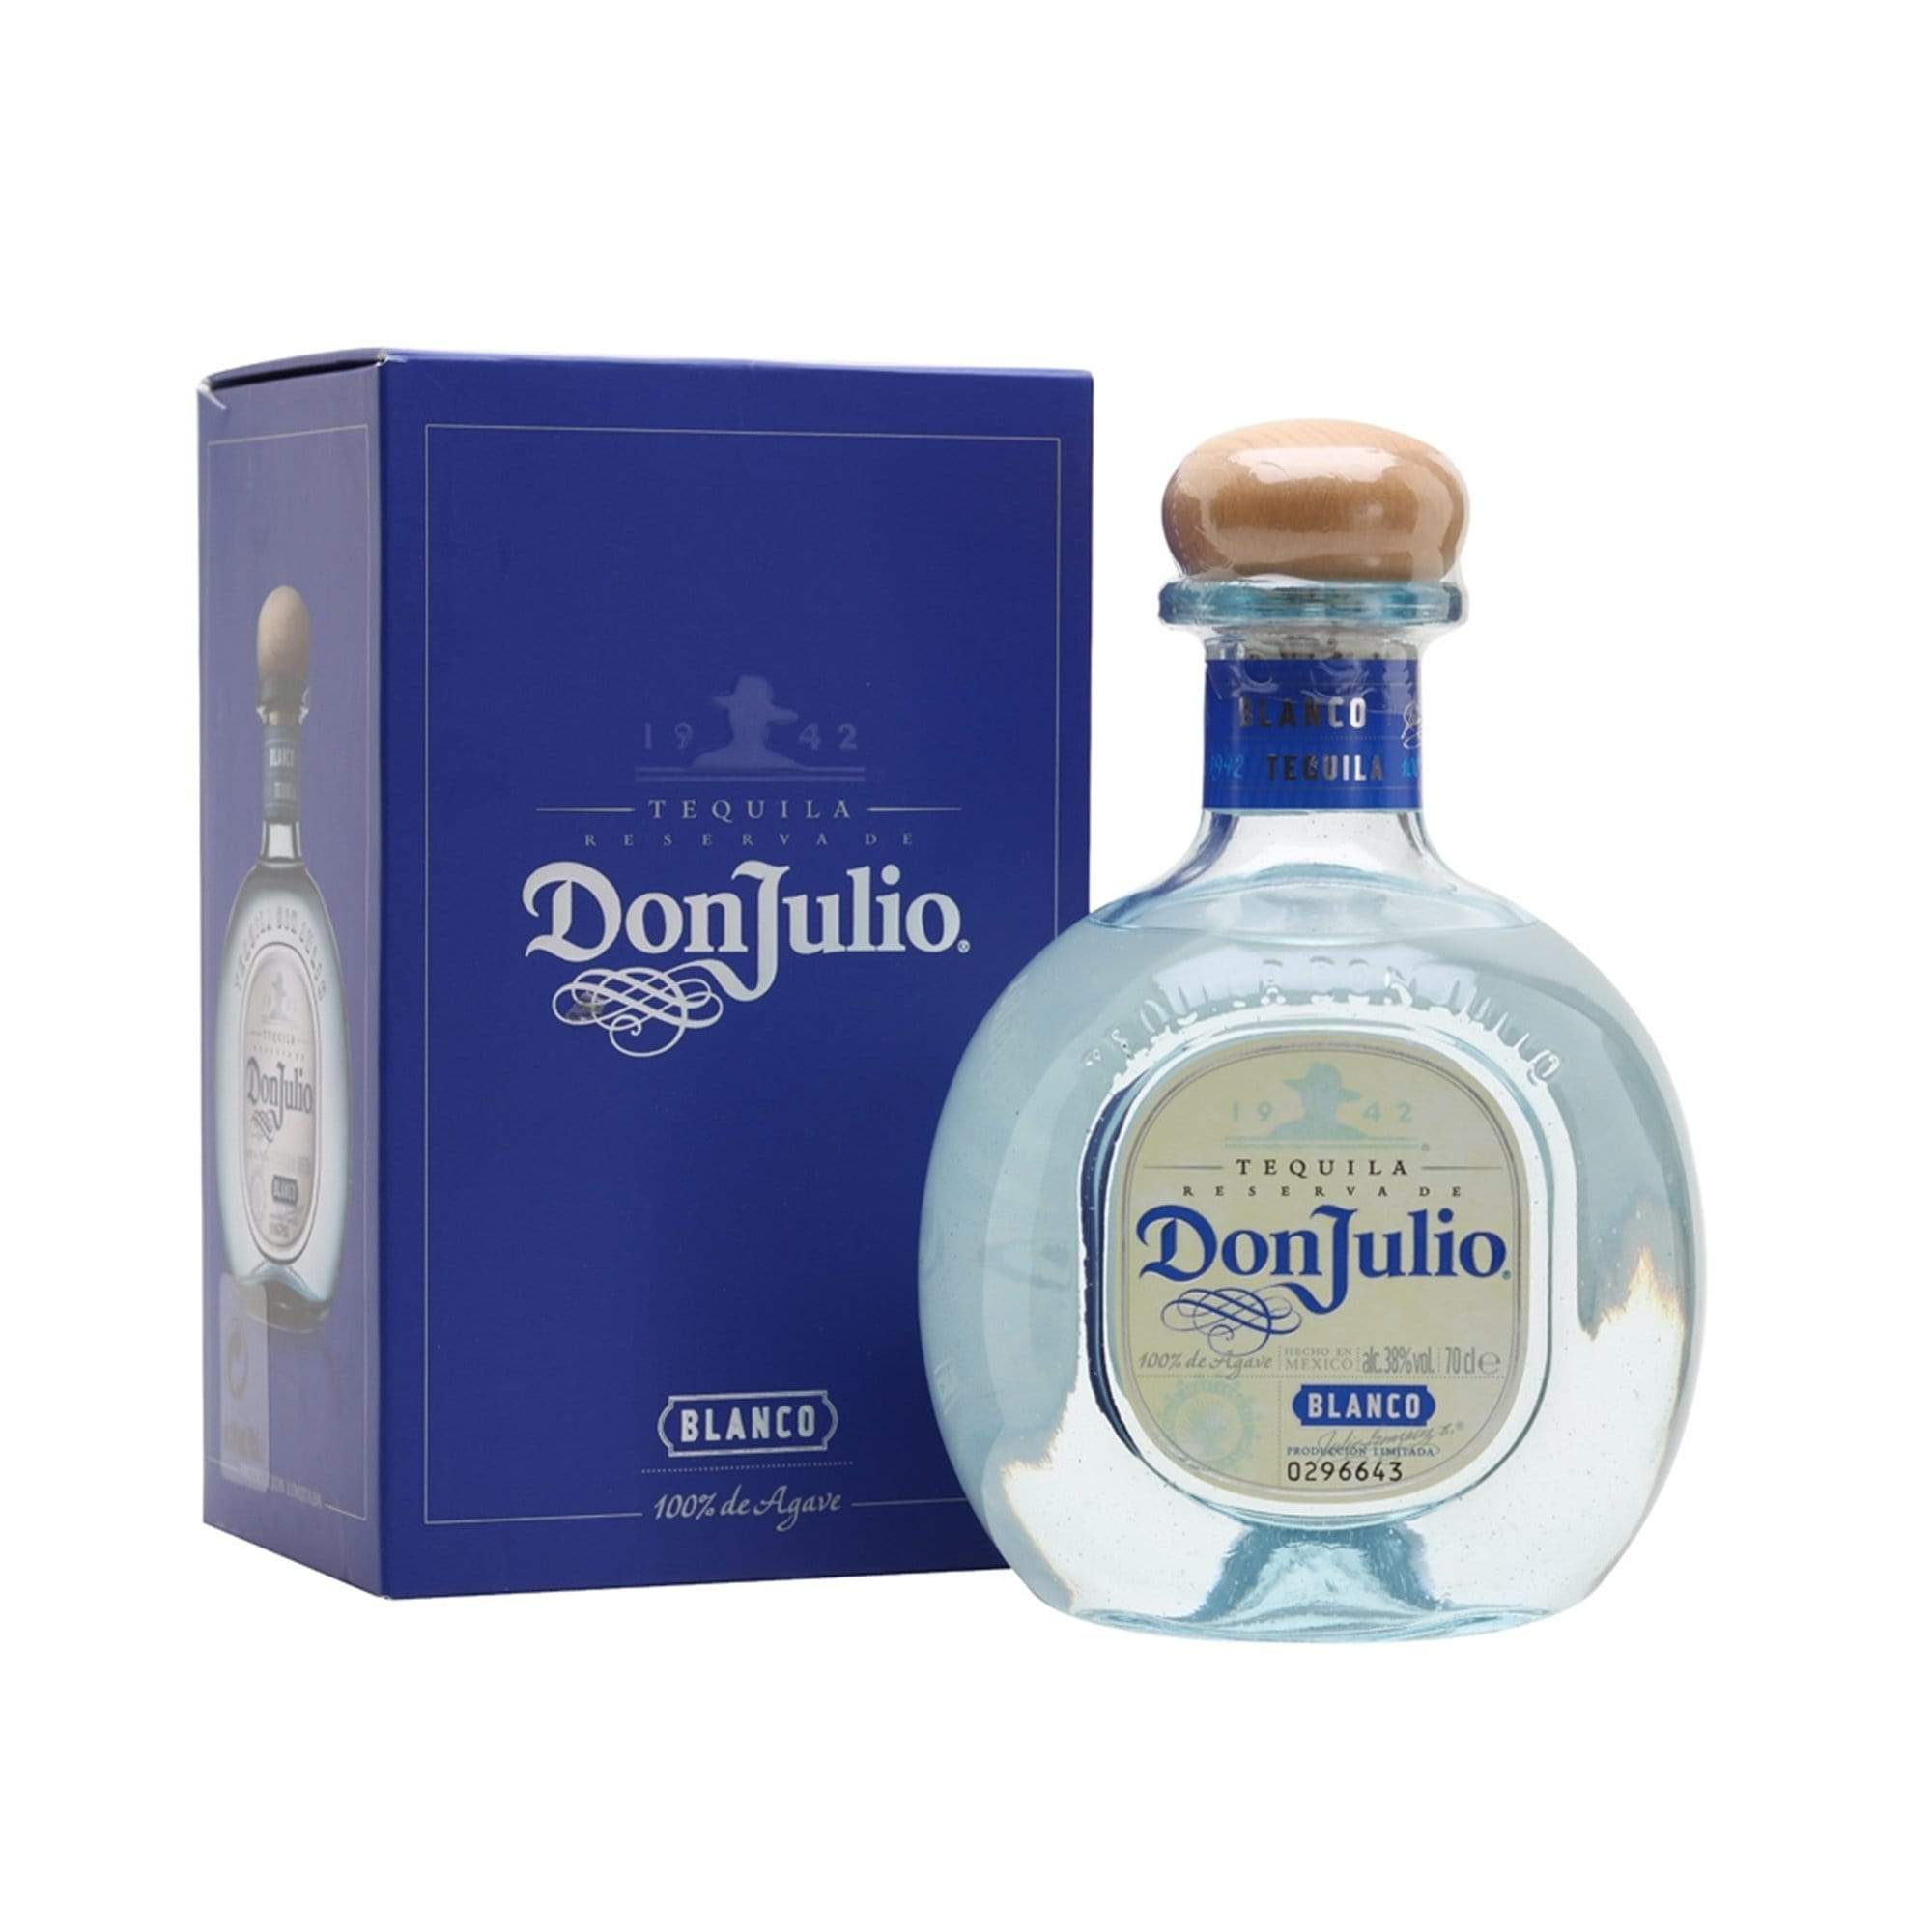 Don Julio TEQUILA 75cl DON JULIO BLANCO TEQUILA